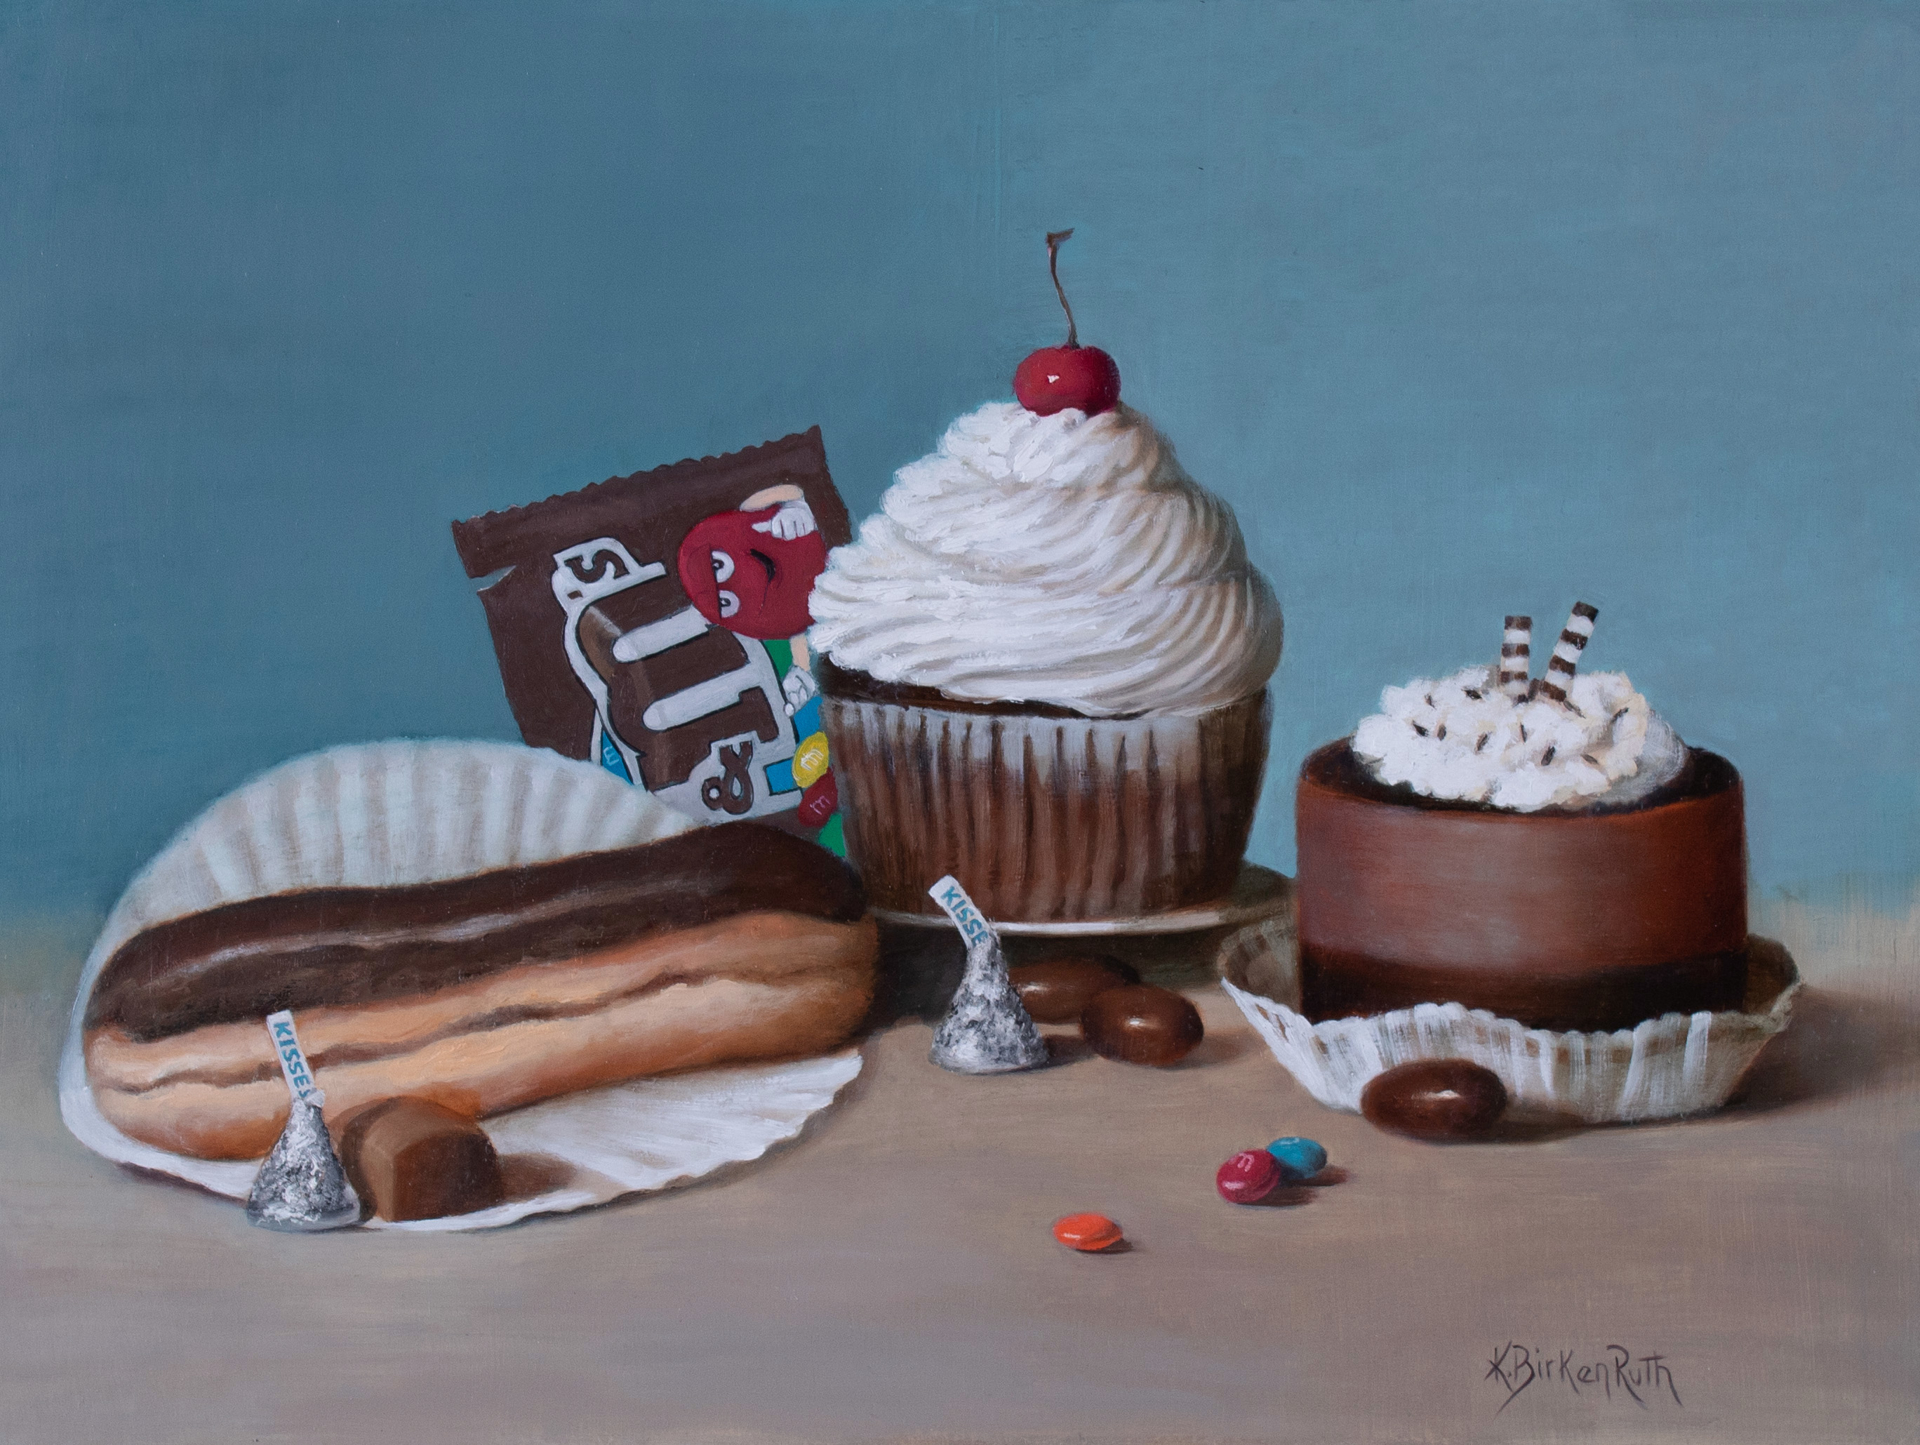 Chocolate Choices by Kelly Birkenruth